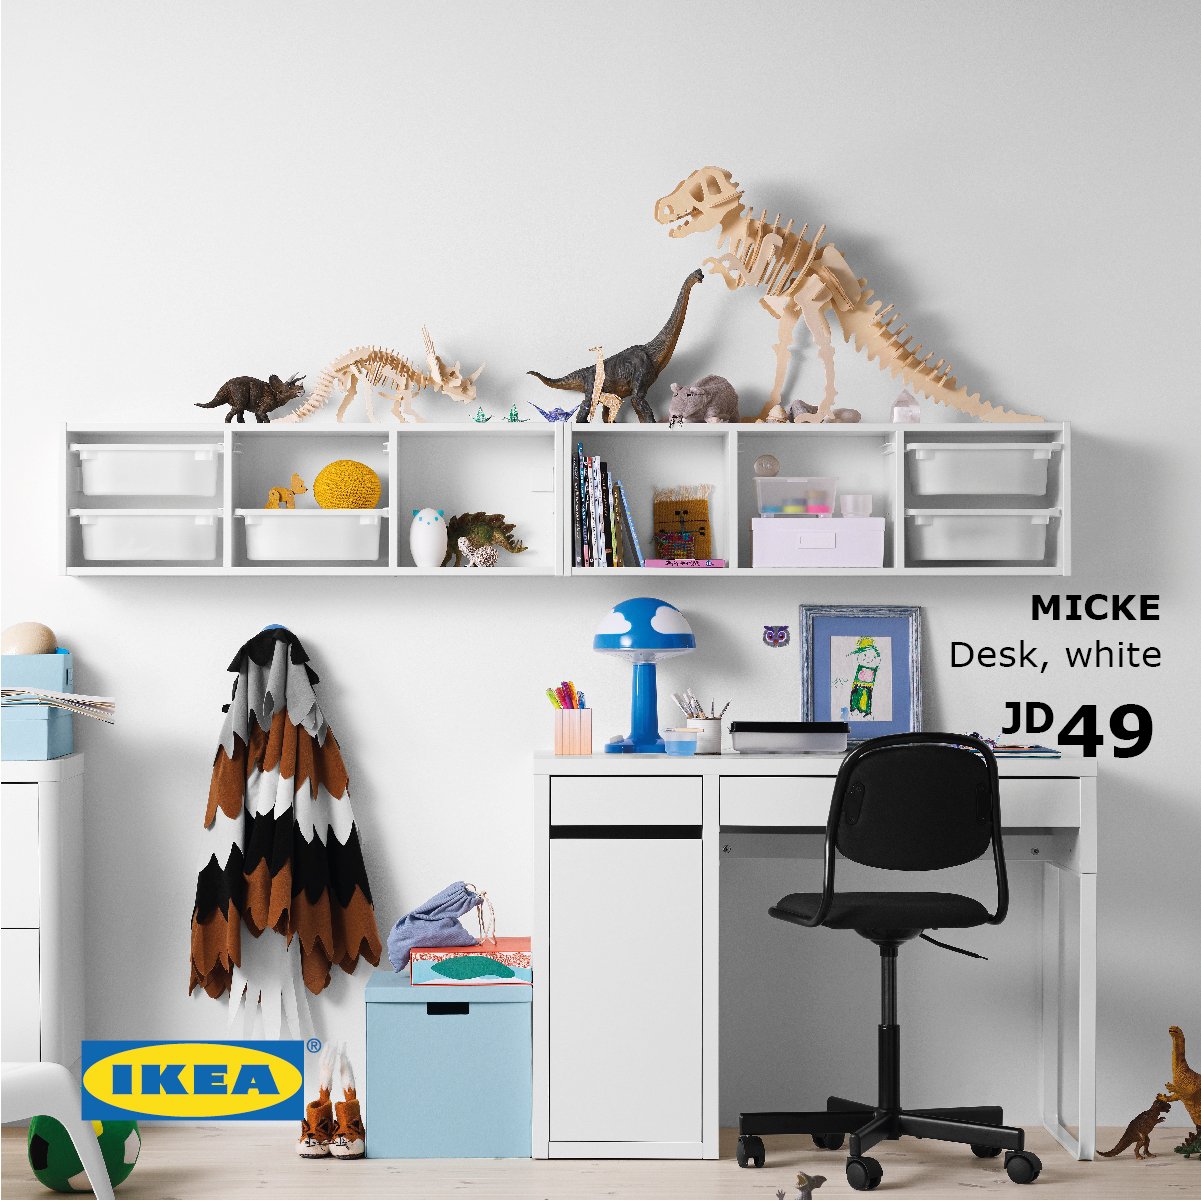 Ikea Jordan On Twitter The Micke Desk Has A Cable Outlet At The